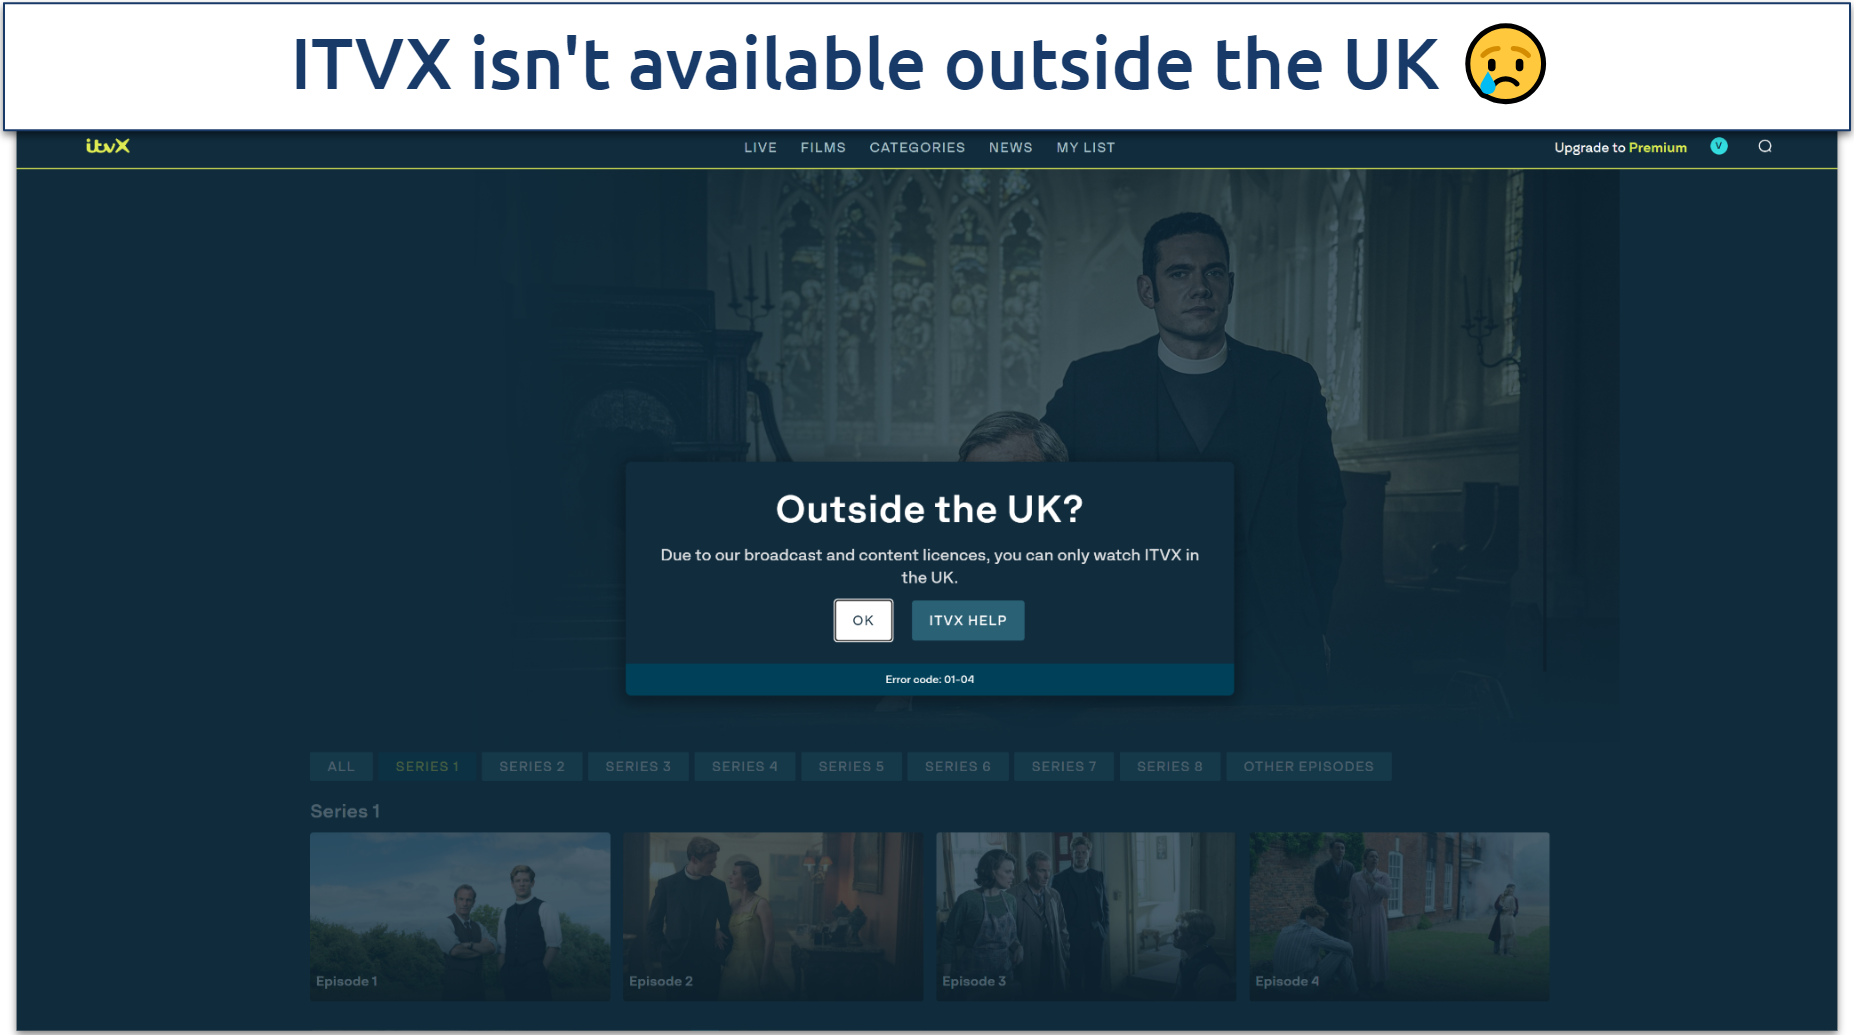 Screenshot of ITVX being blocked outside the UK